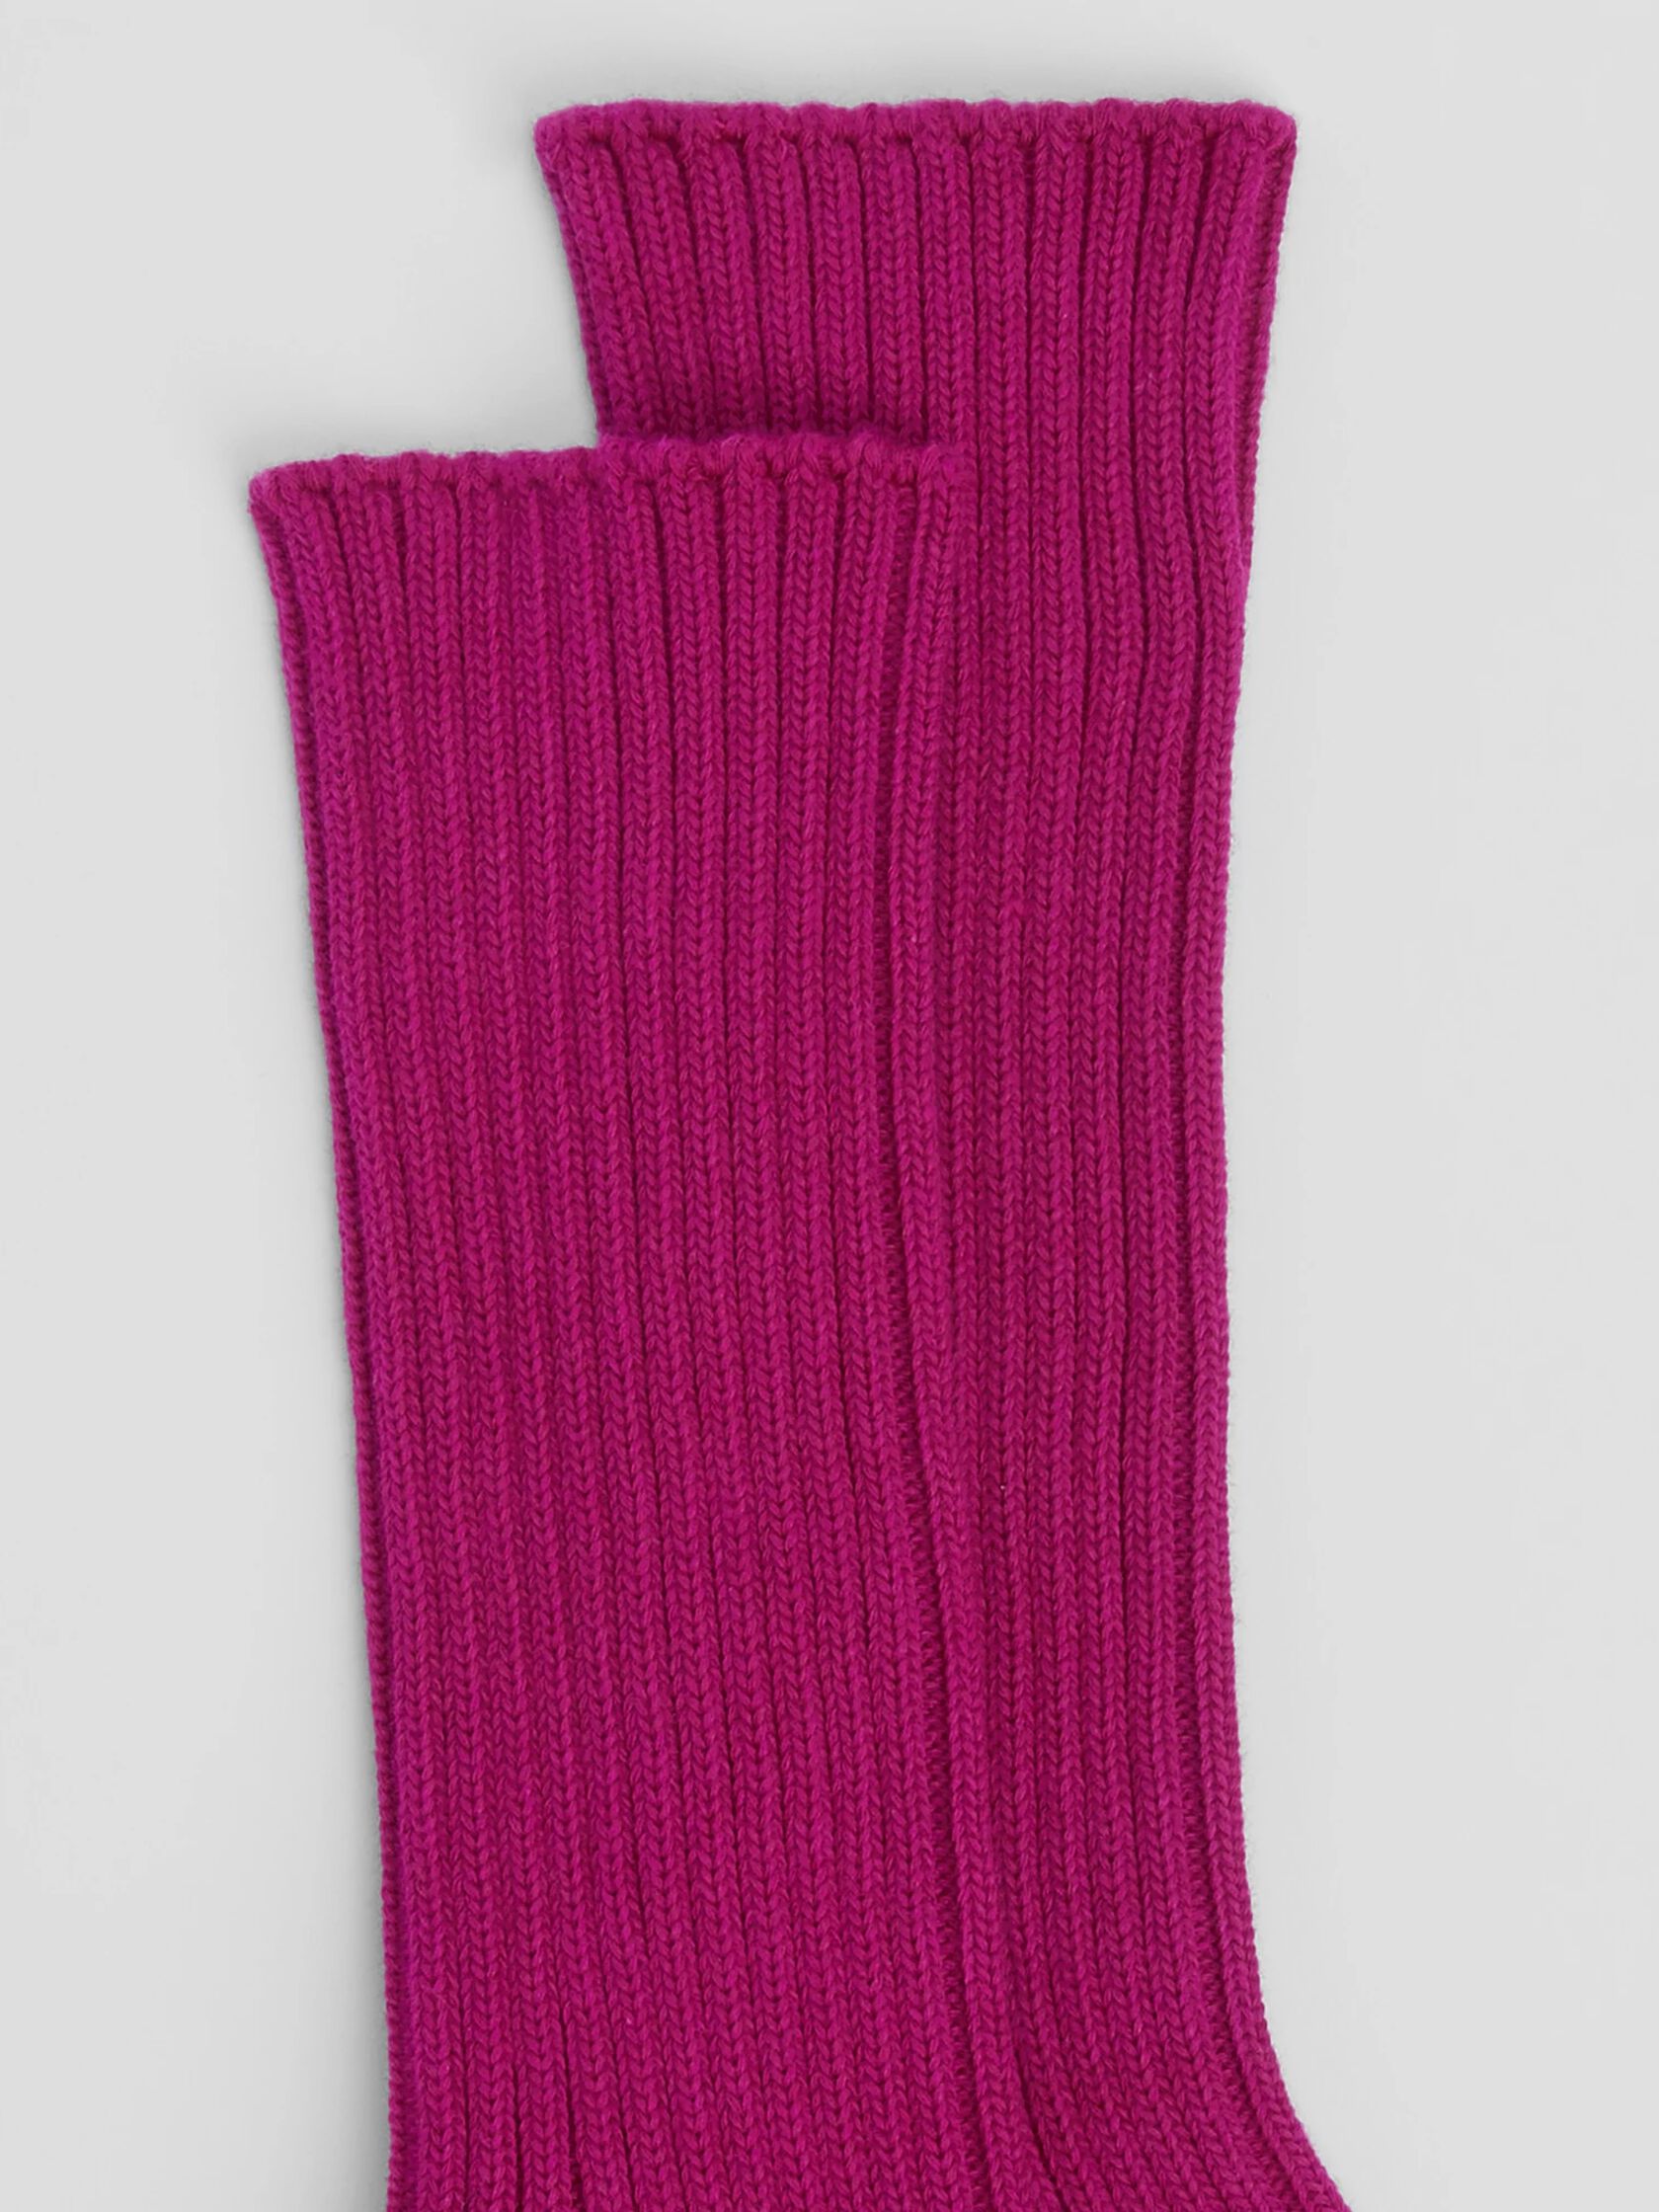 Cotton Ribbed Trouser Sock